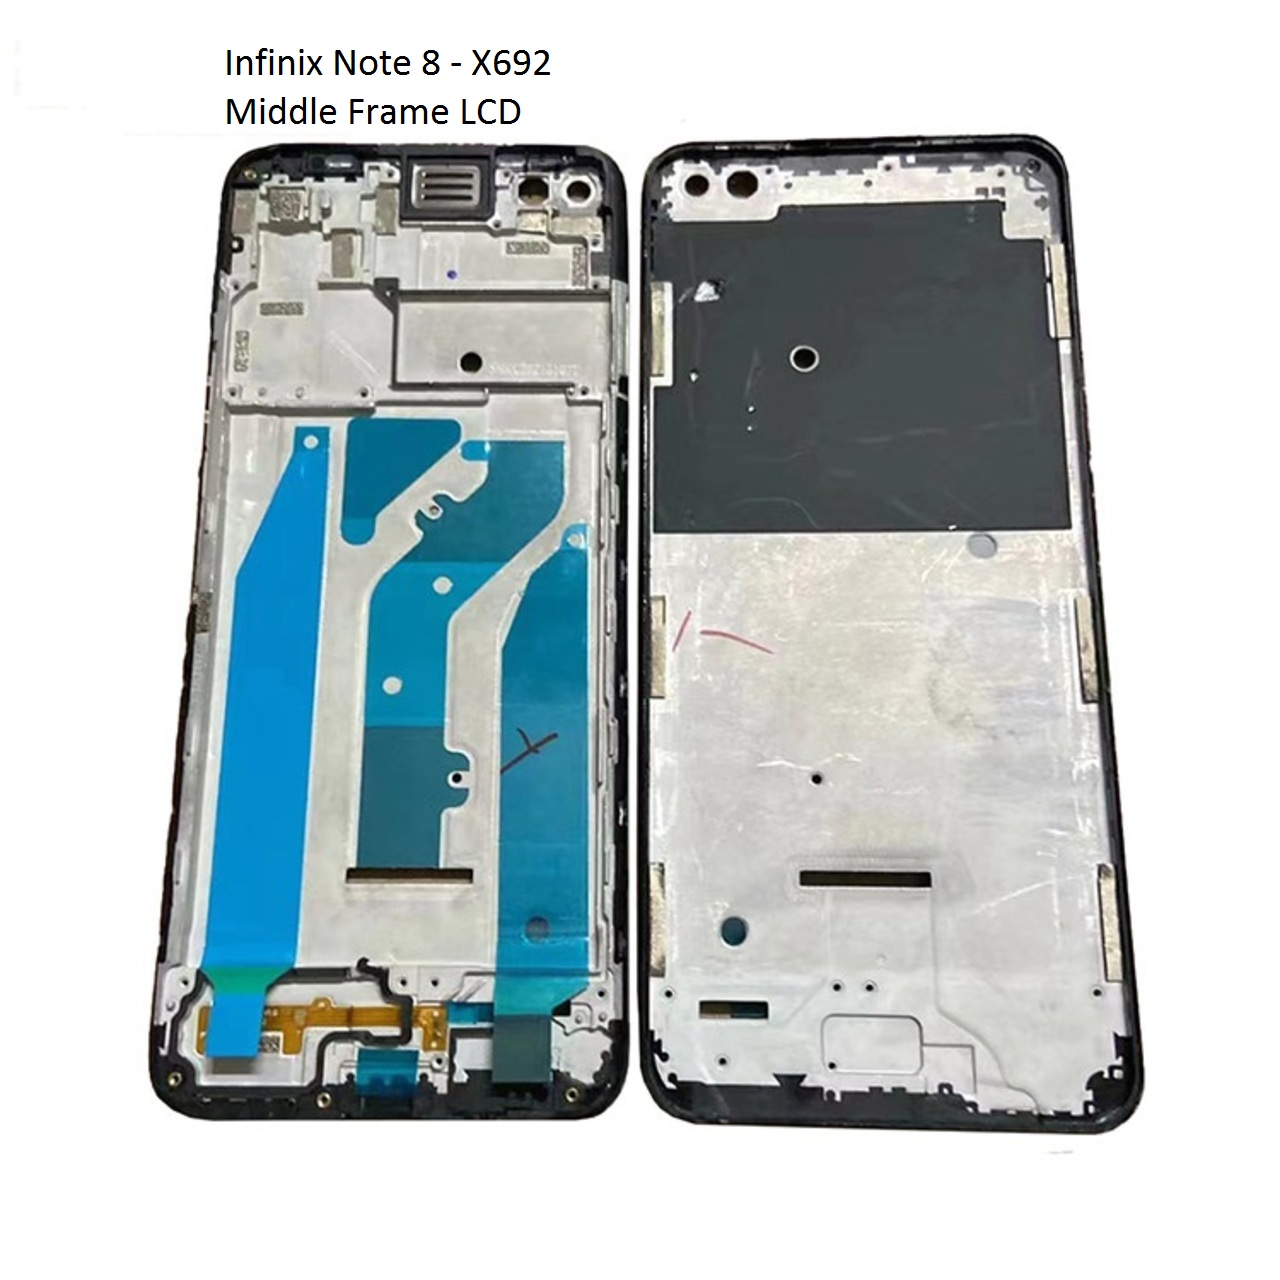 MIDDLE-FRAME-LCD-INFINIX-X692-INFINIX-NOTE-8